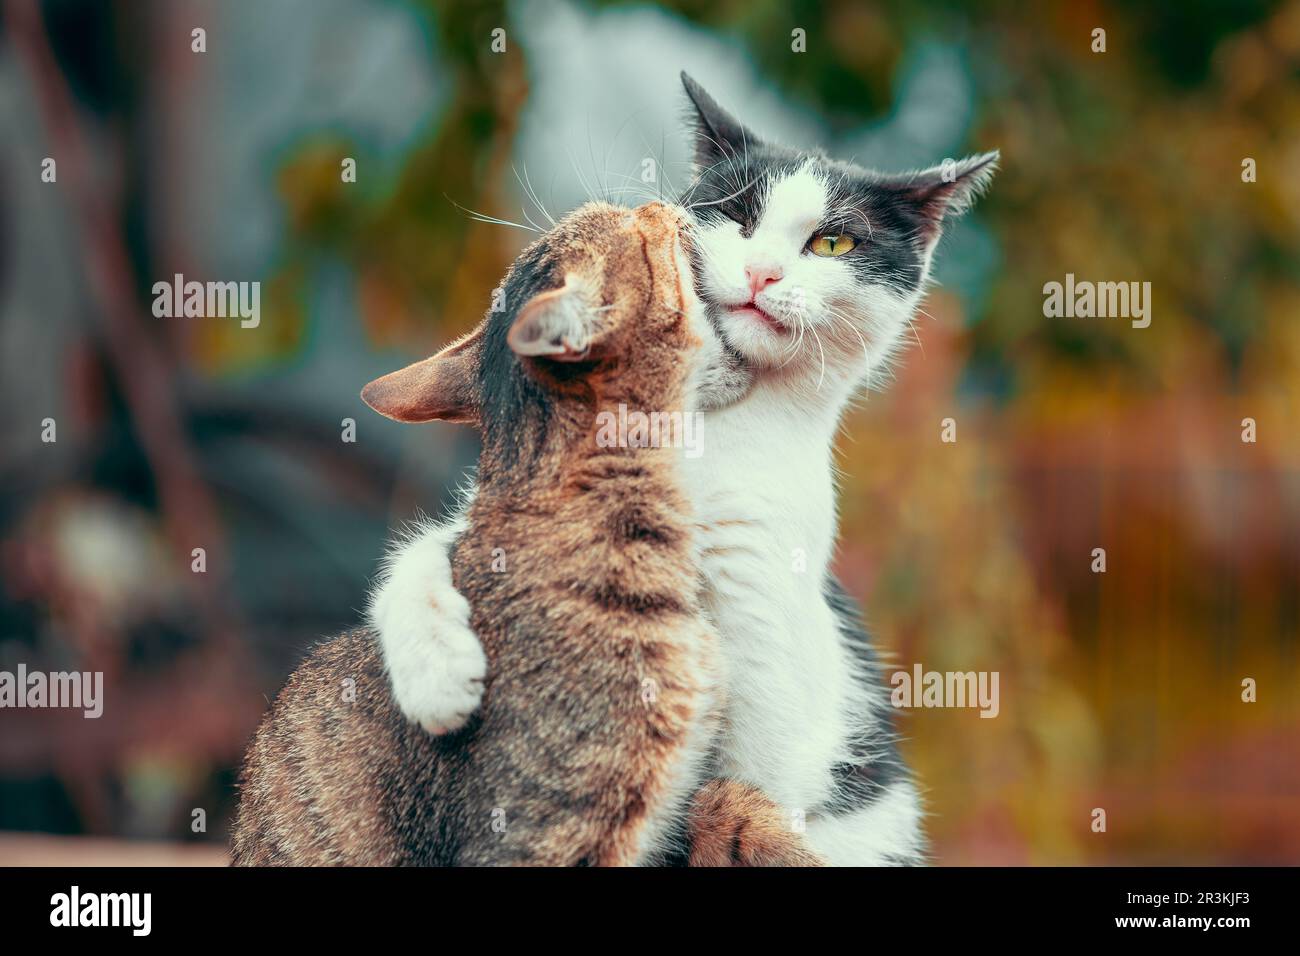 Tabby cat bite gray and white cat in fall colors Stock Photo